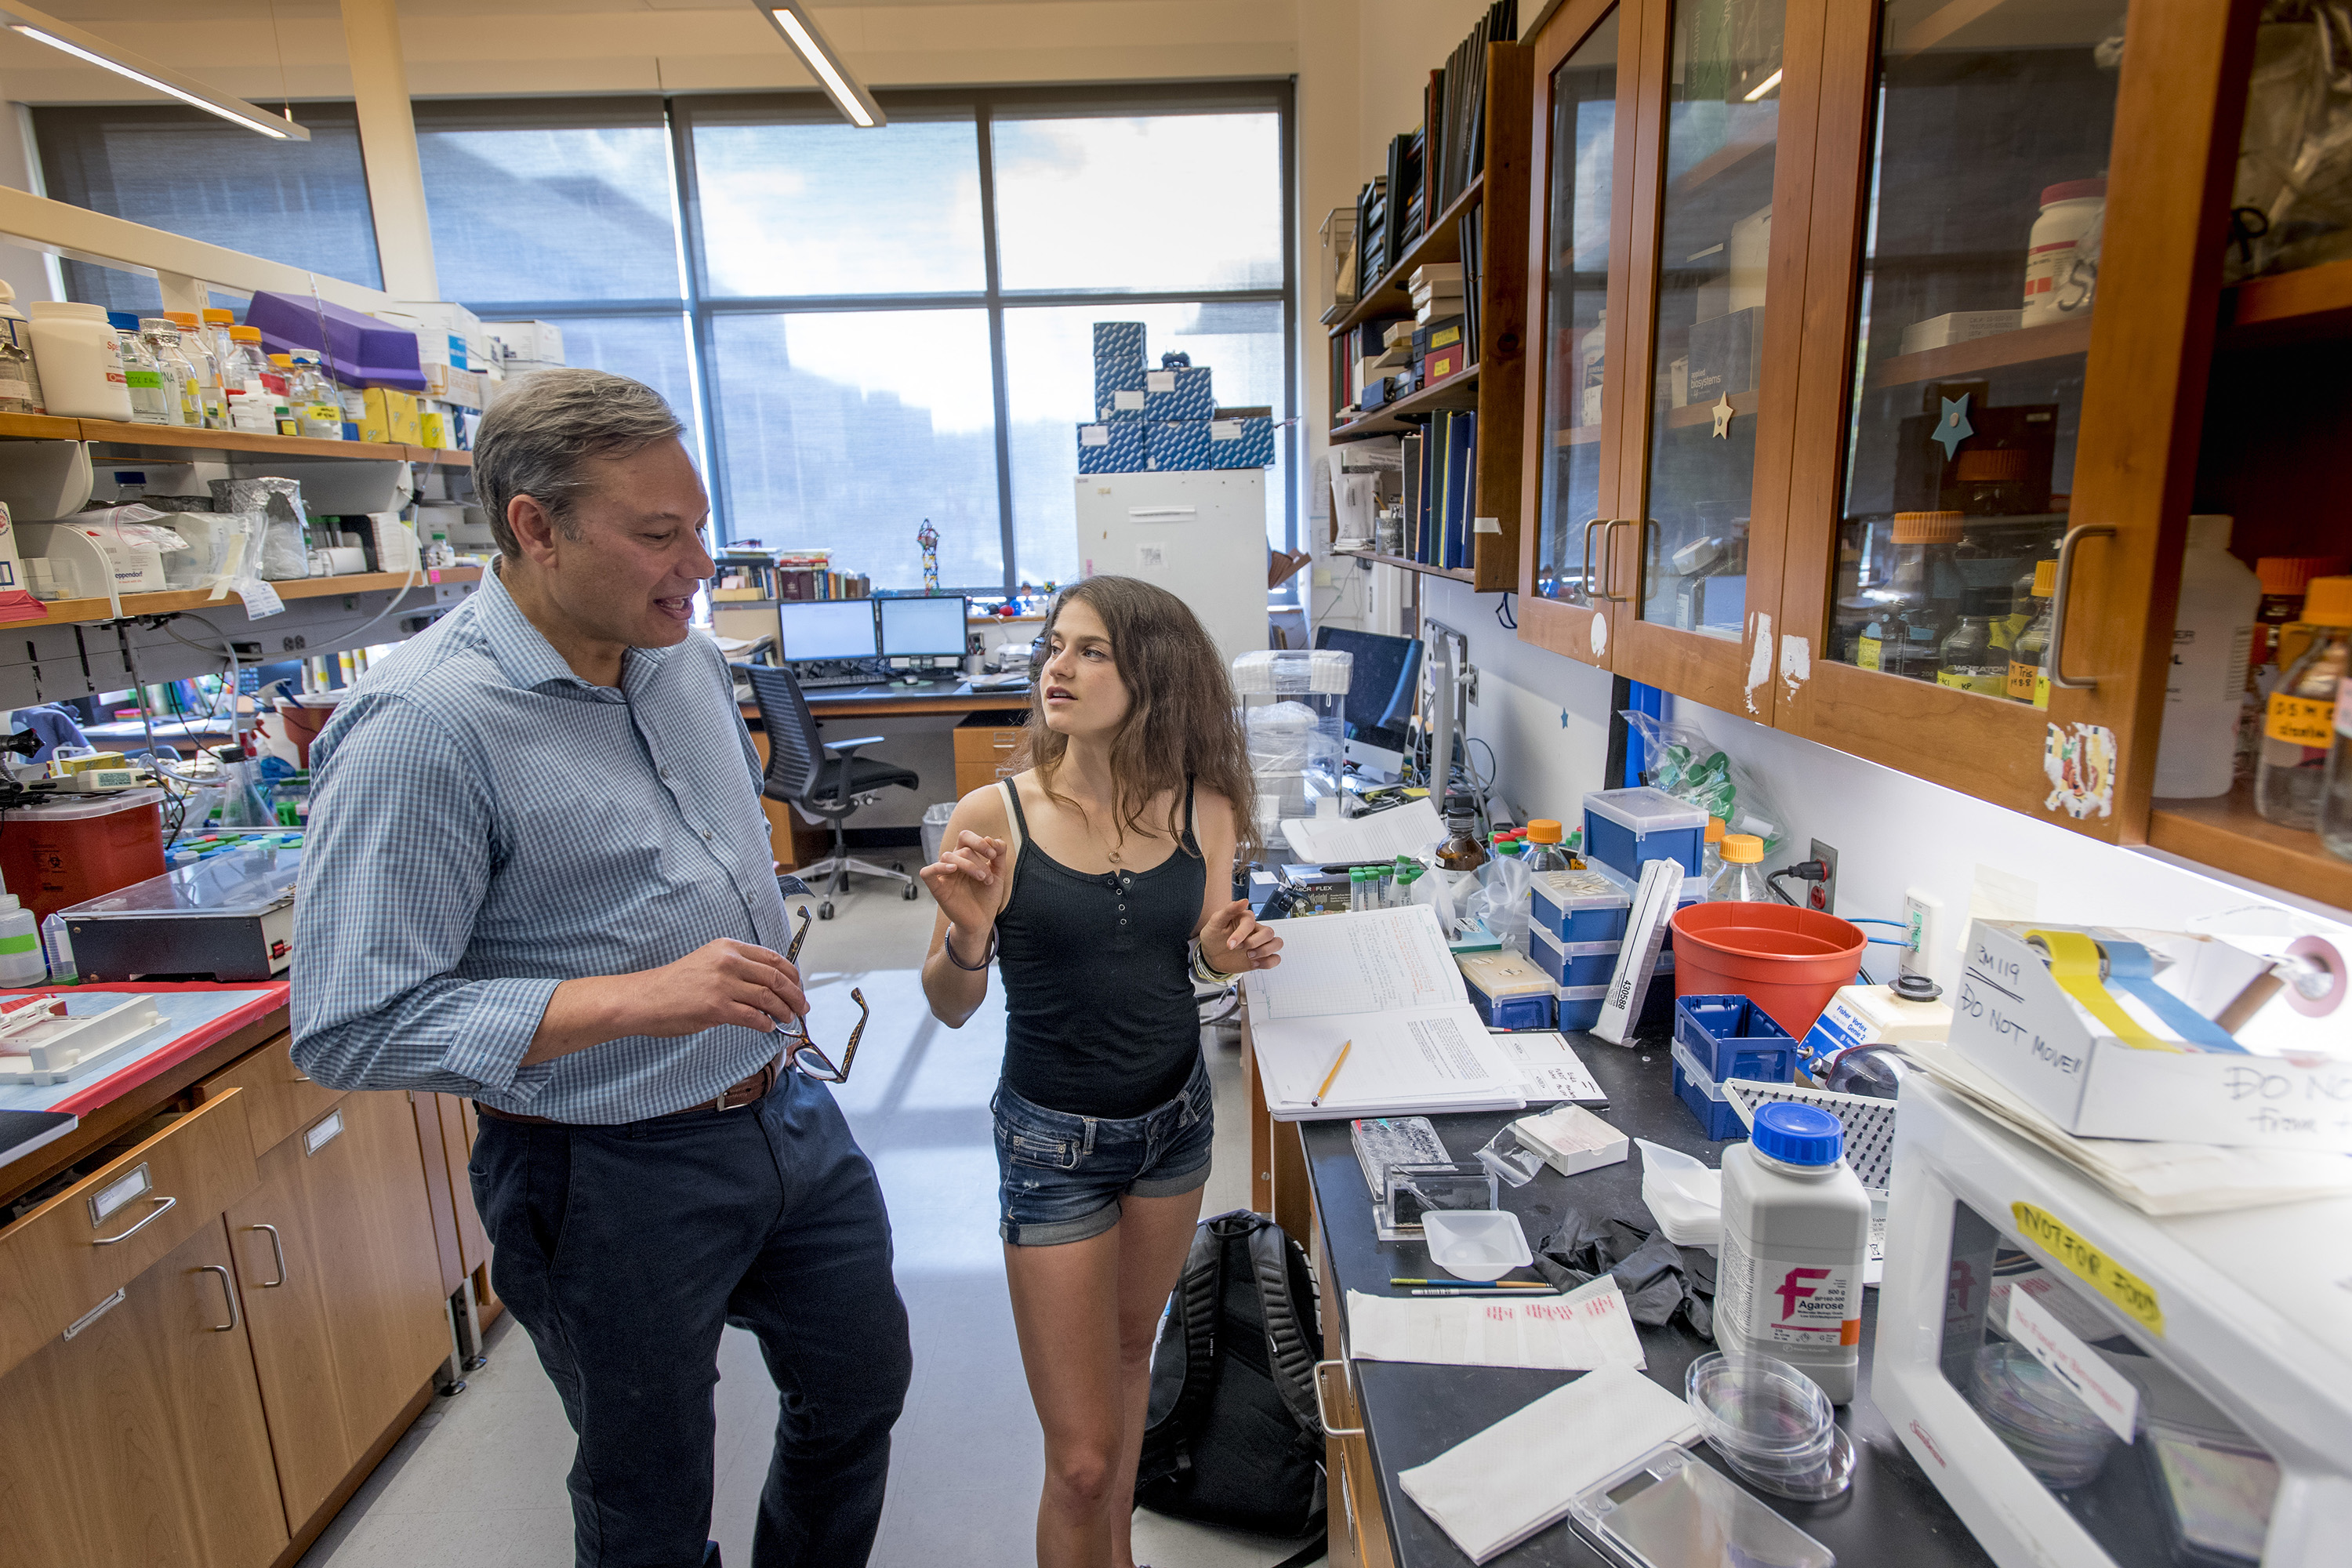 'Being a Husky teaches you how to be a better person – not just on campus, but for the rest of your life,' says Randazzo, an undergraduate researcher in the lab of Professor Joseph LoTurco and a student in the Special Program in Medicine as well as an athlete on the Women's Track team. (Sean Flynn/UConn Photo)